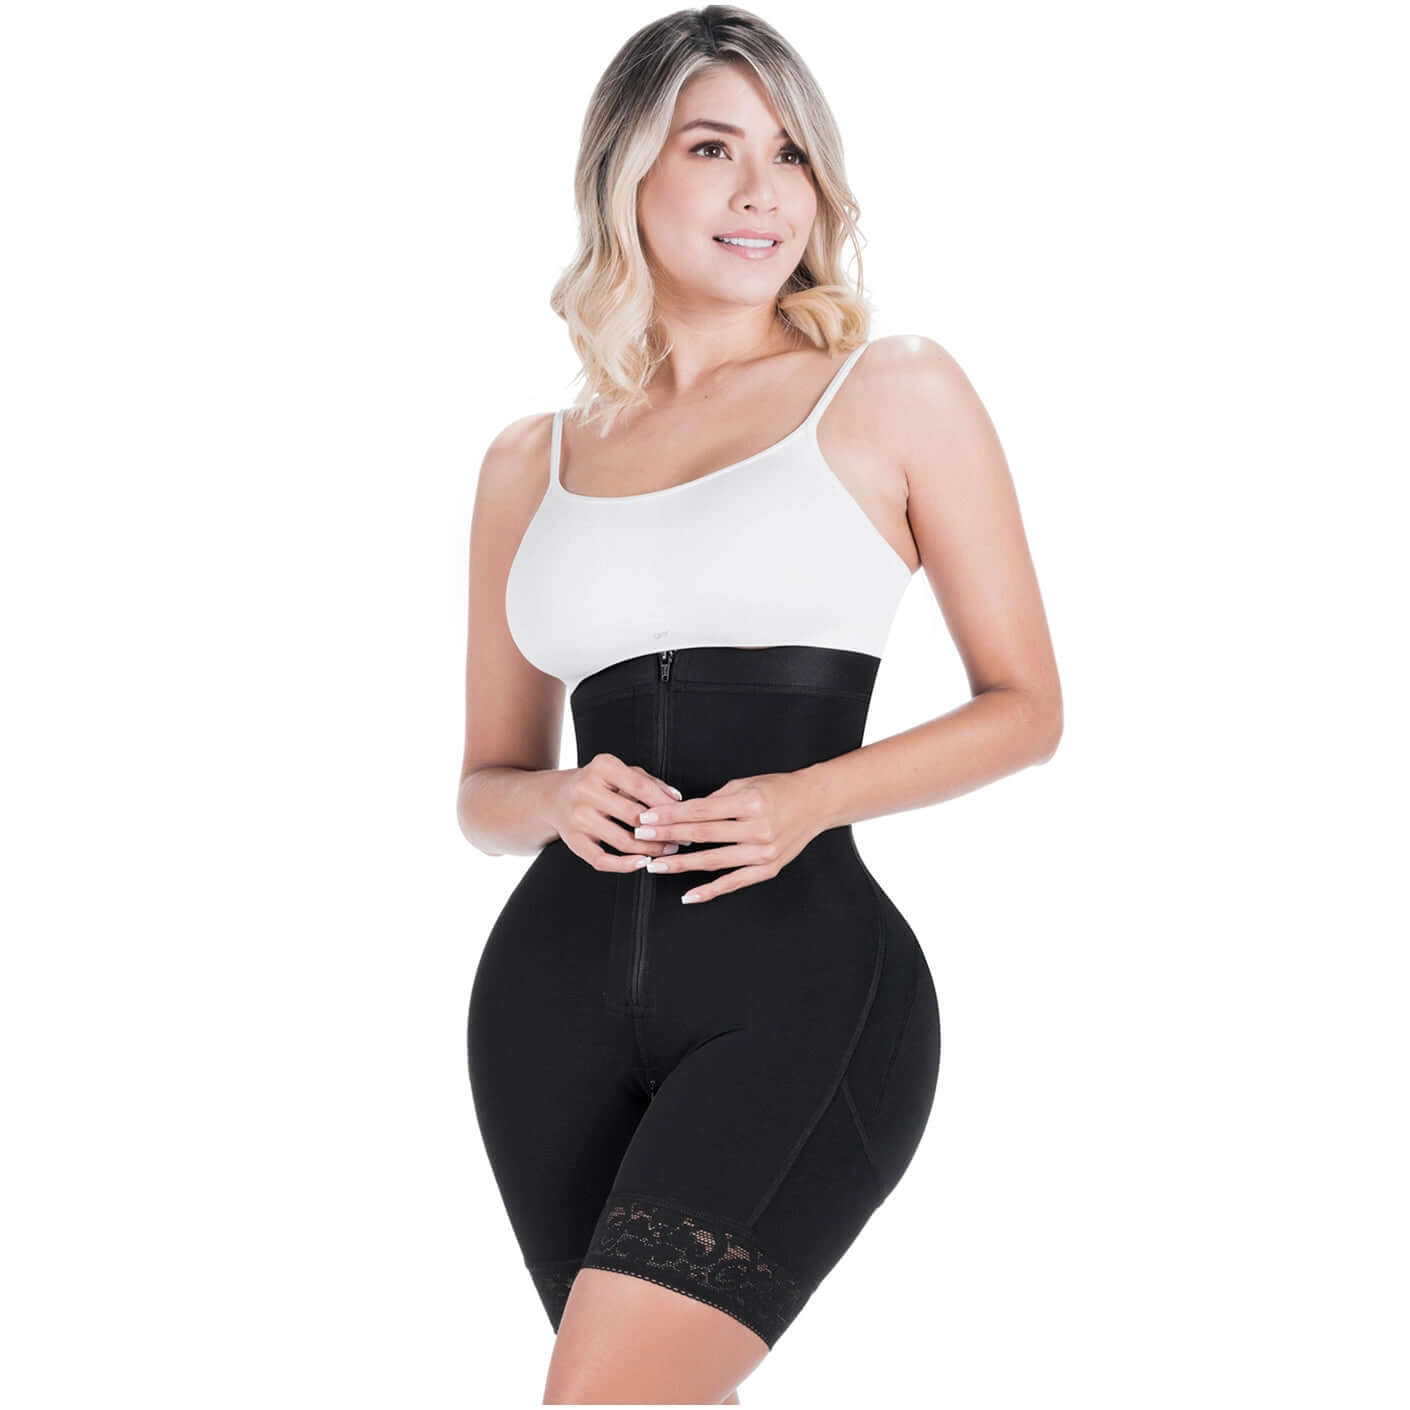 FAJAS COLOMBIANAS HIGH WAISTED SHAPEWEAR SHORTS | DAILY USE BUTT LIFTING GARMENT | POWERNET